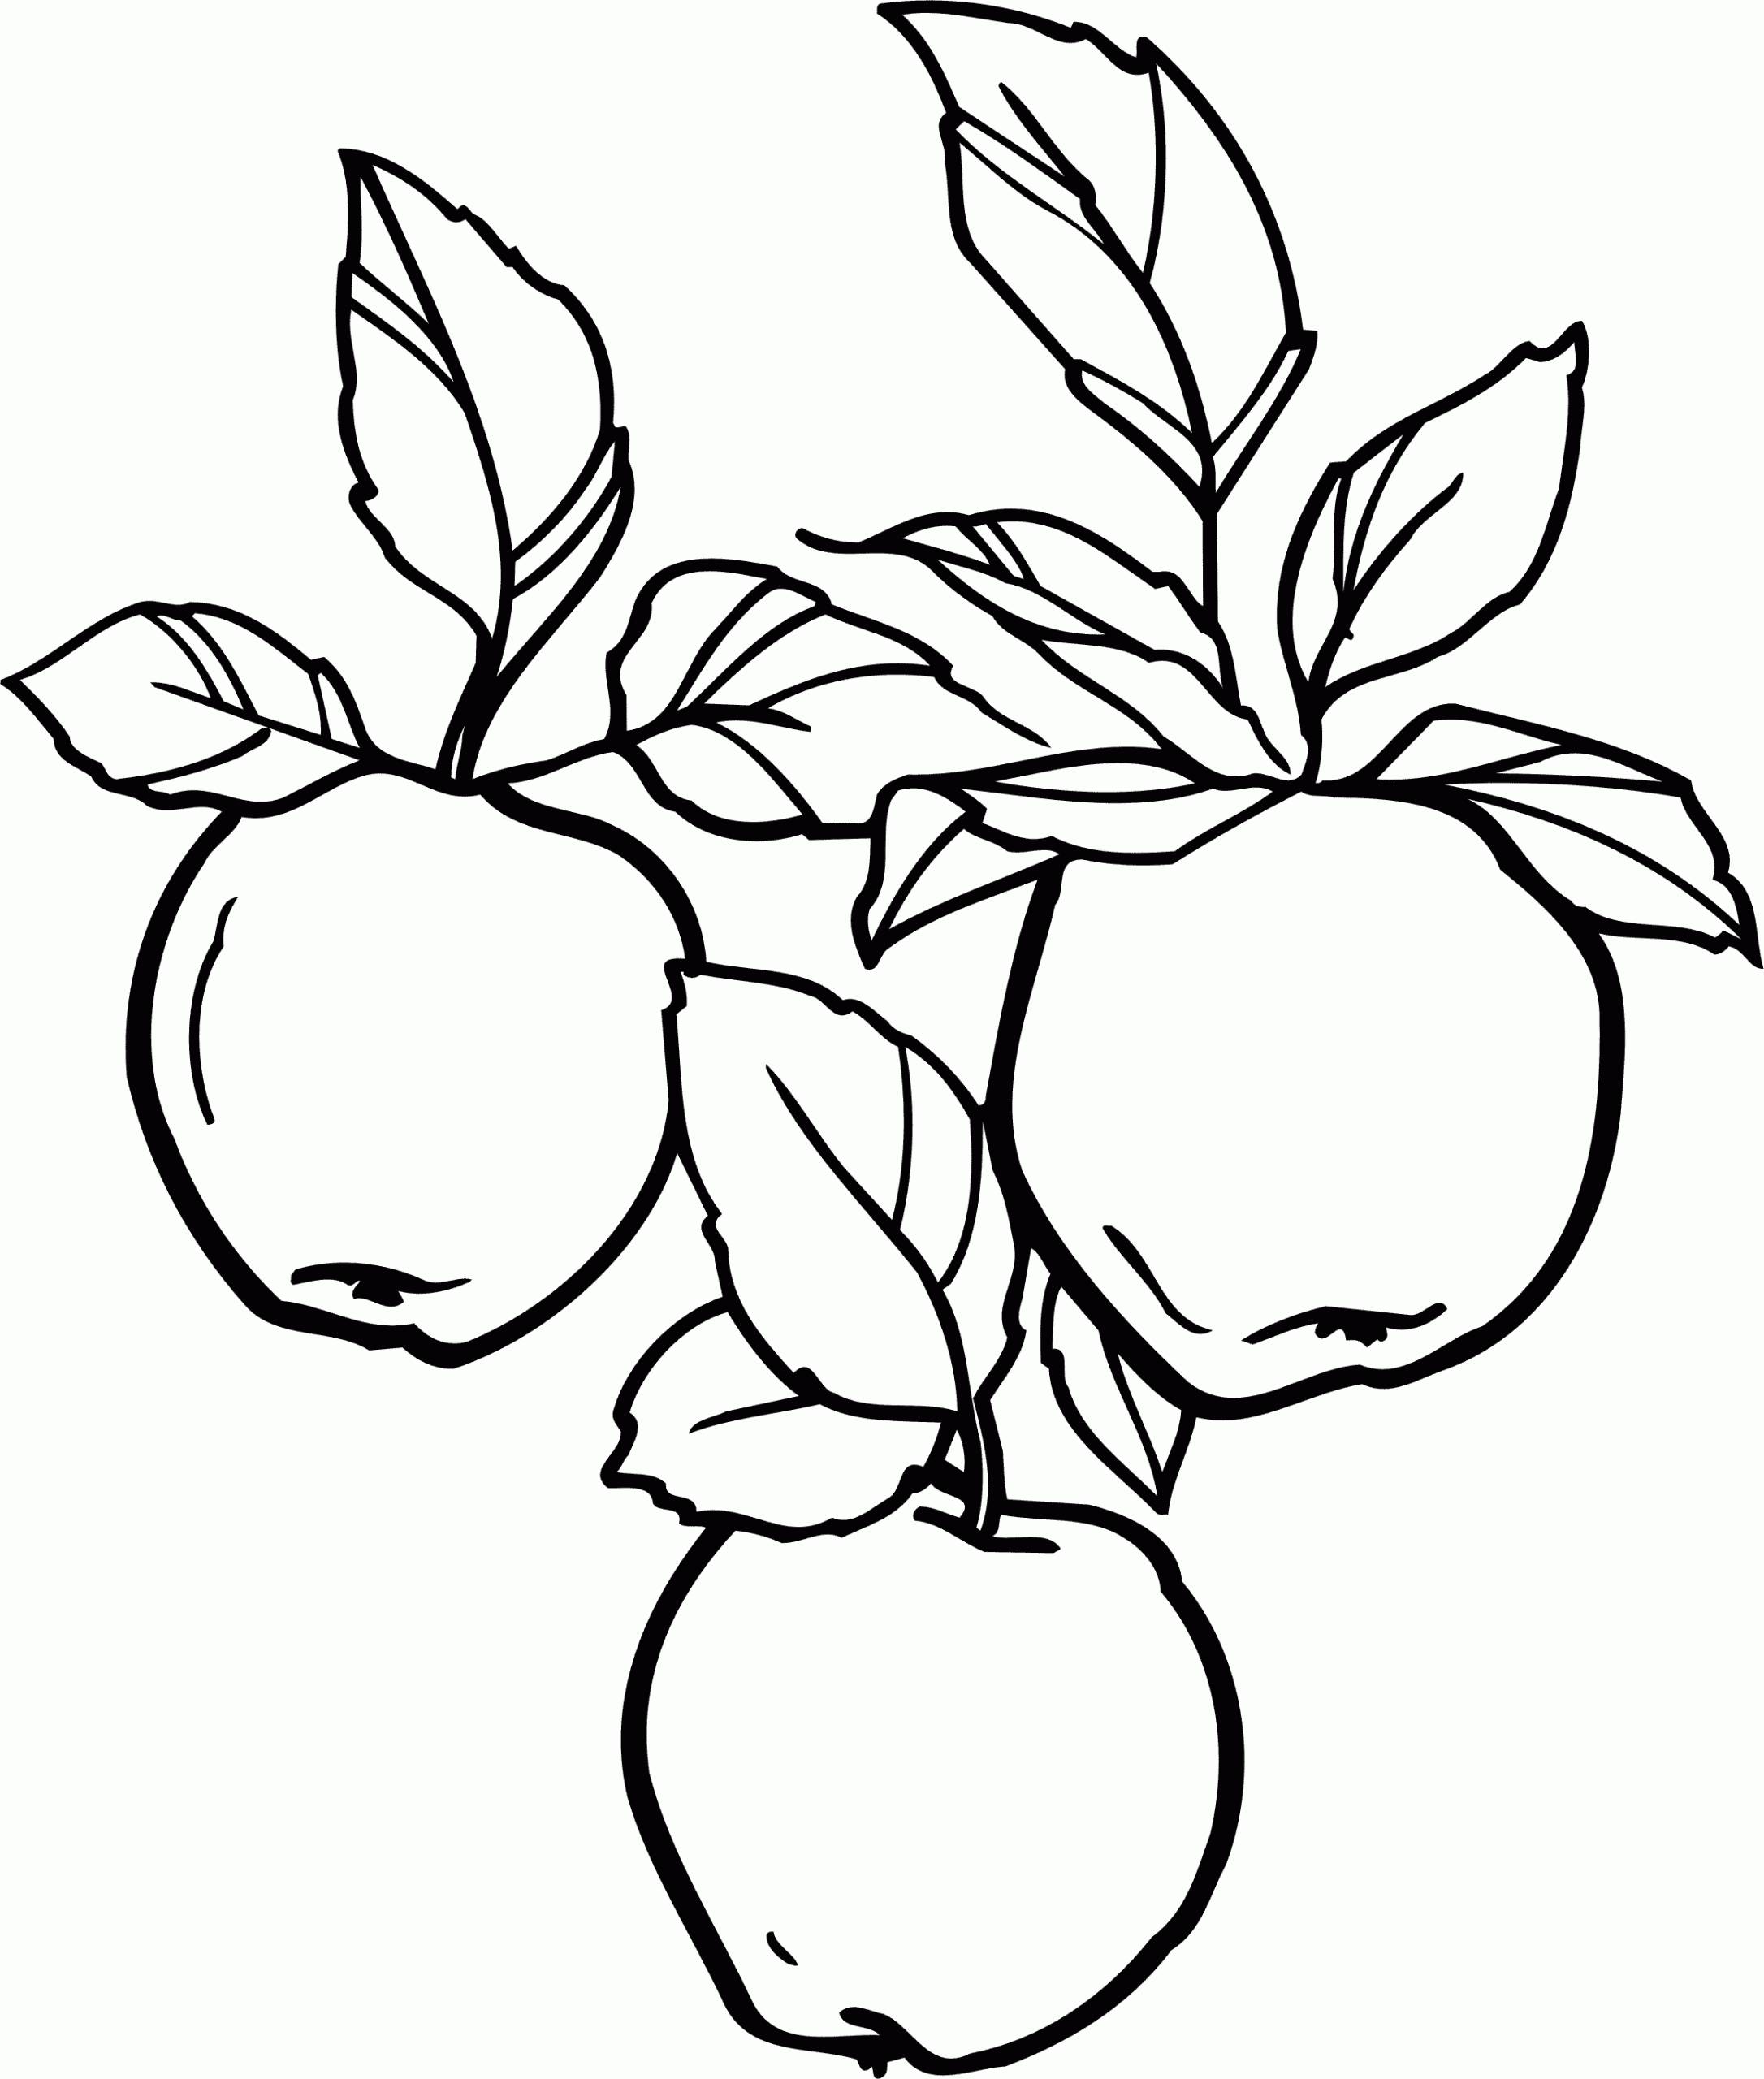 Three apples on a branch